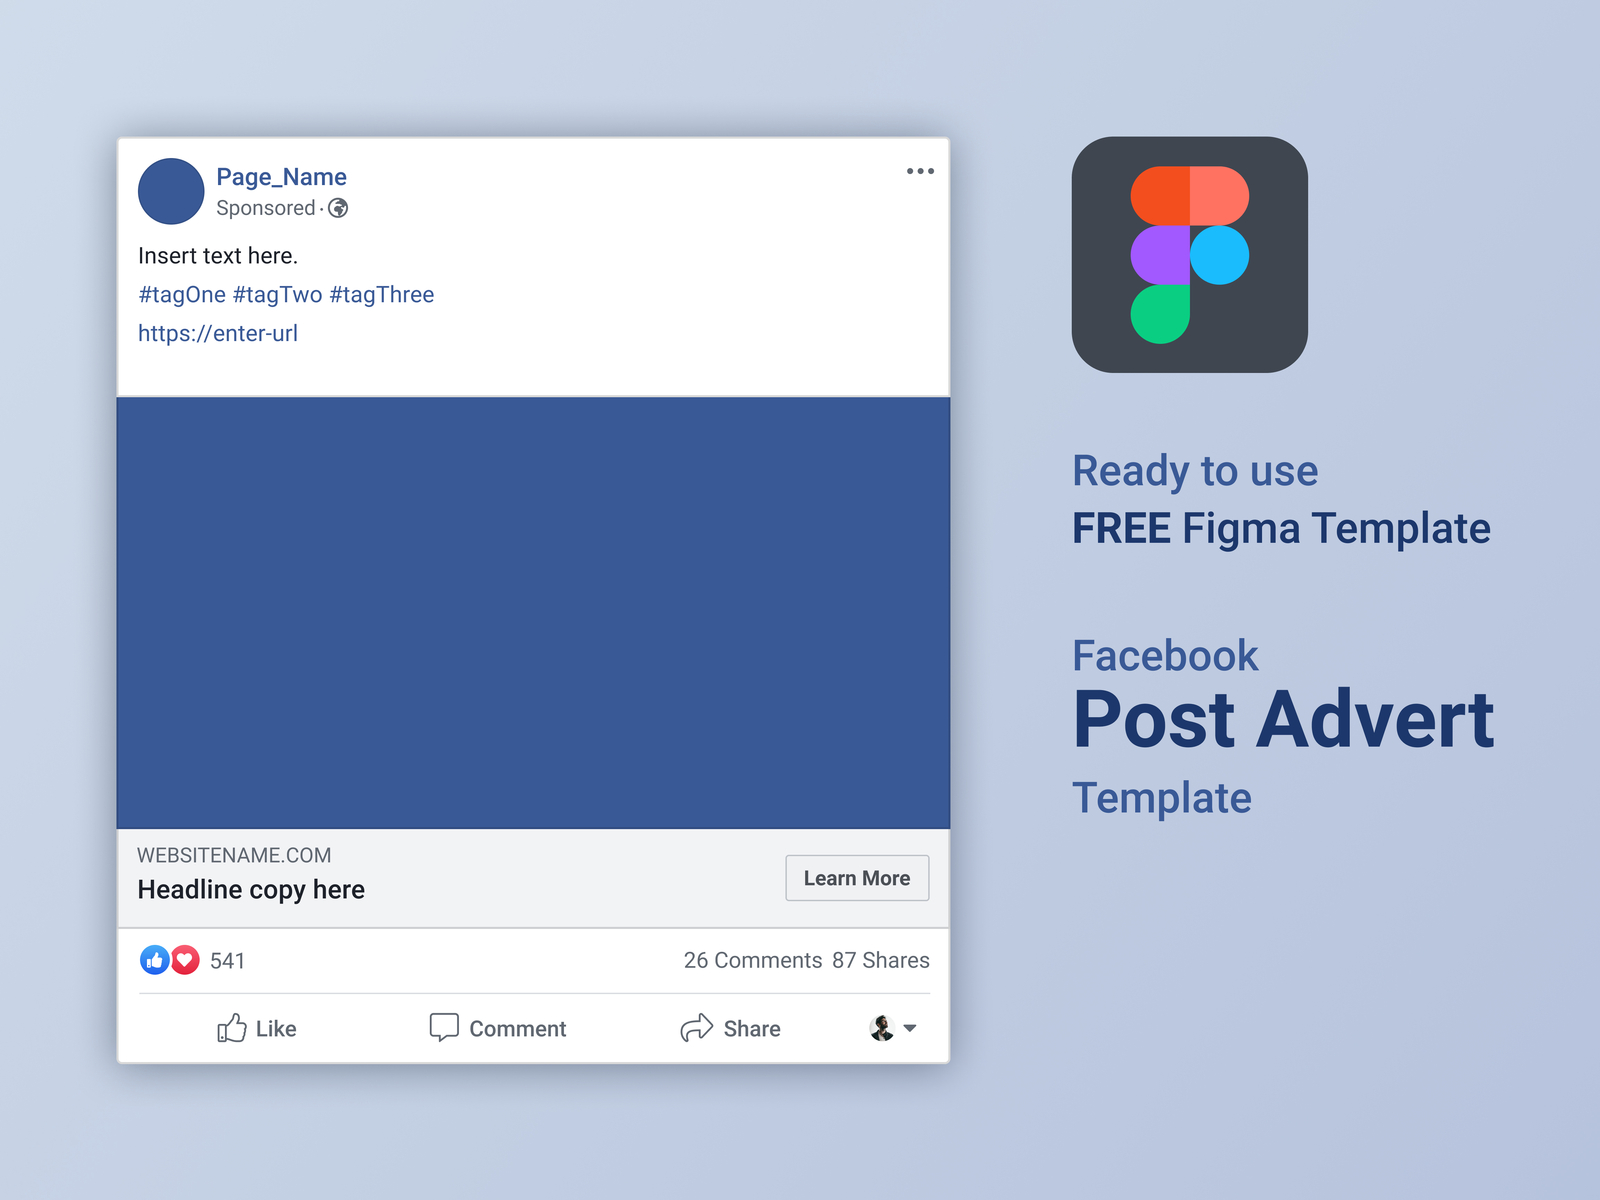 free-figma-facebook-advert-post-template-by-ernest-gerber-on-dribbble